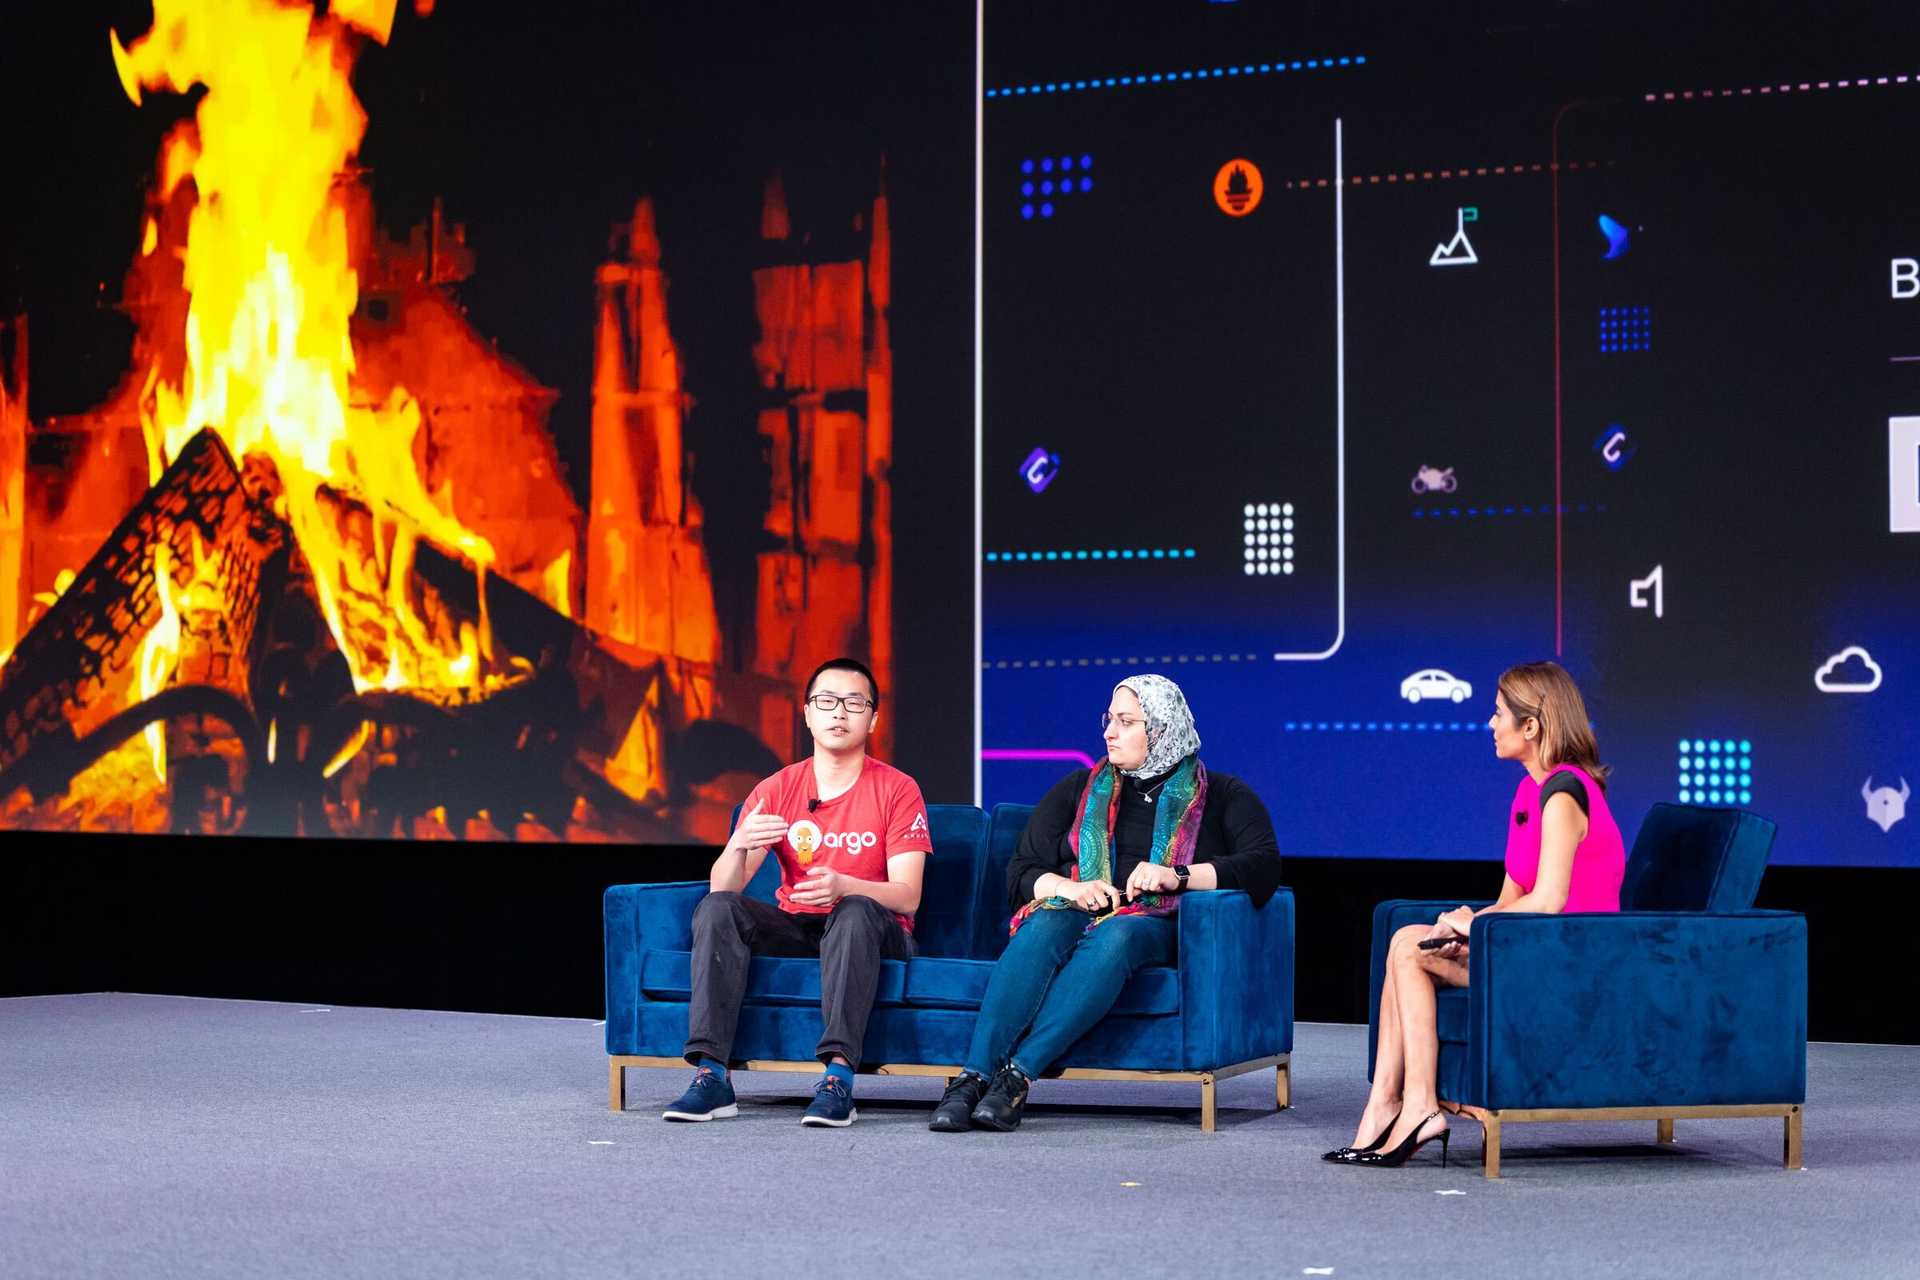 Fireside Chat during Day 3 Keynote at KubeCon 2022